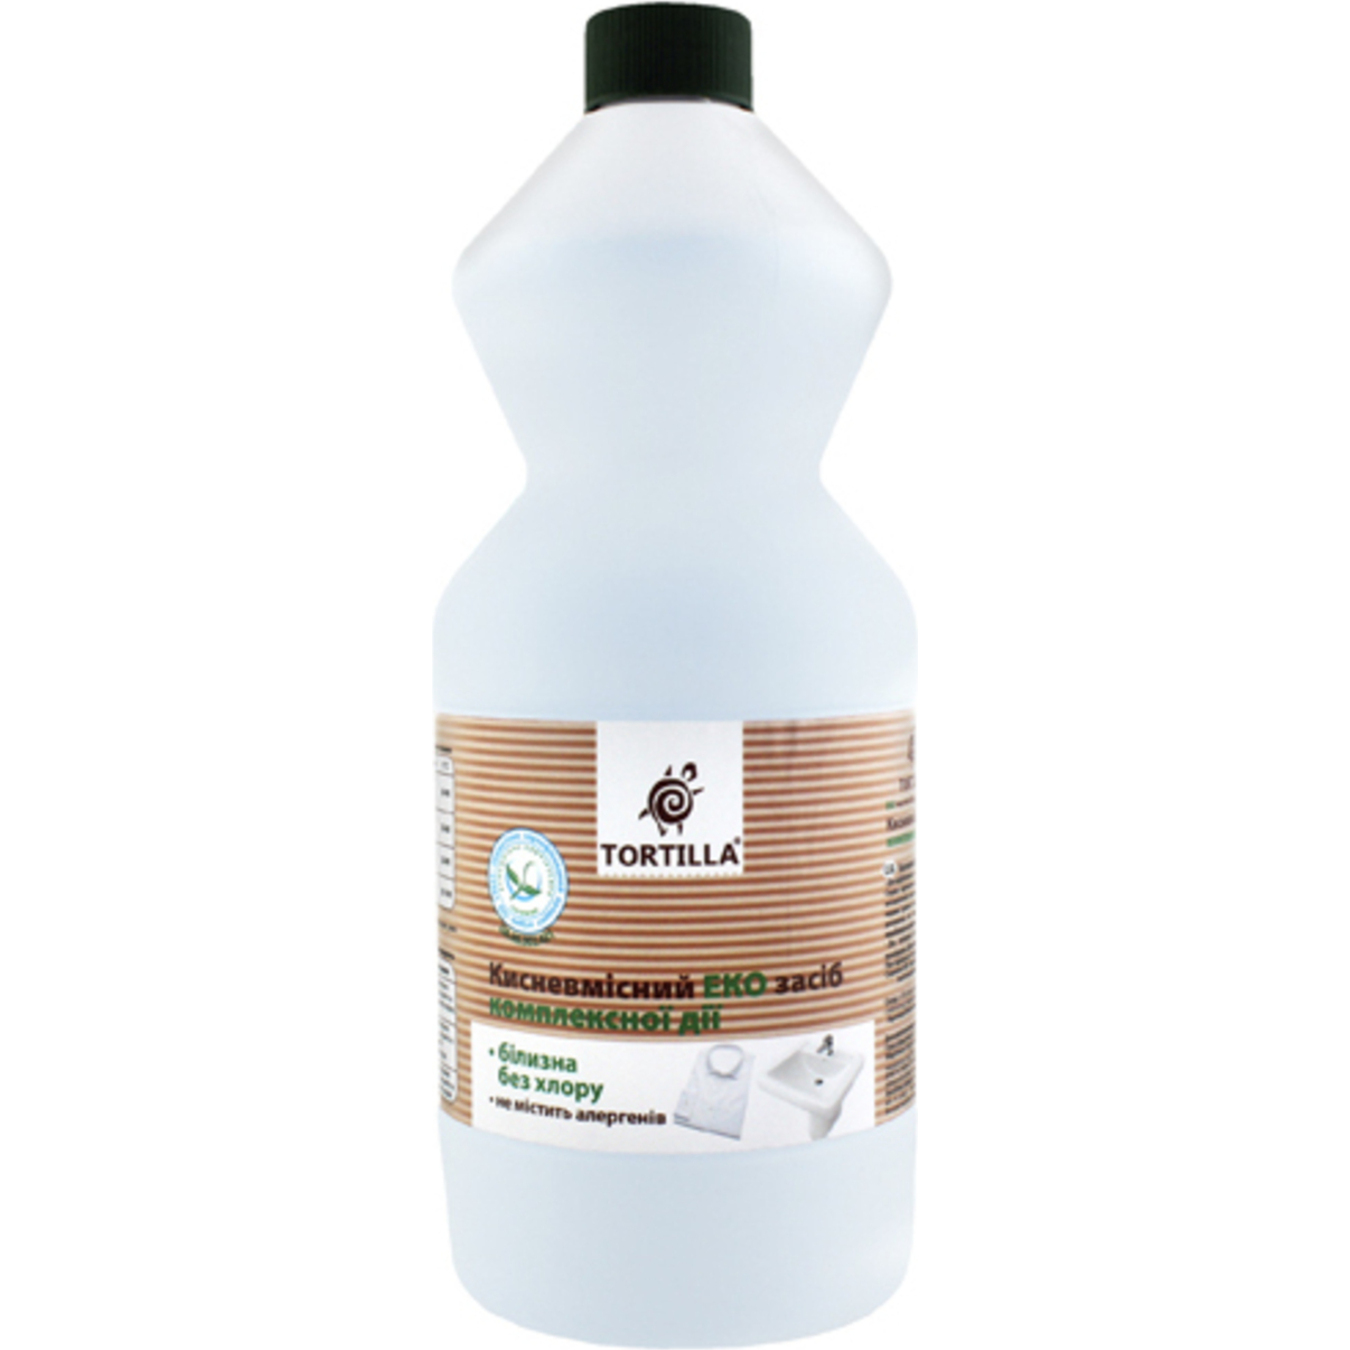 Tortilla Bleach chlorine free with antibacterial action 850ml